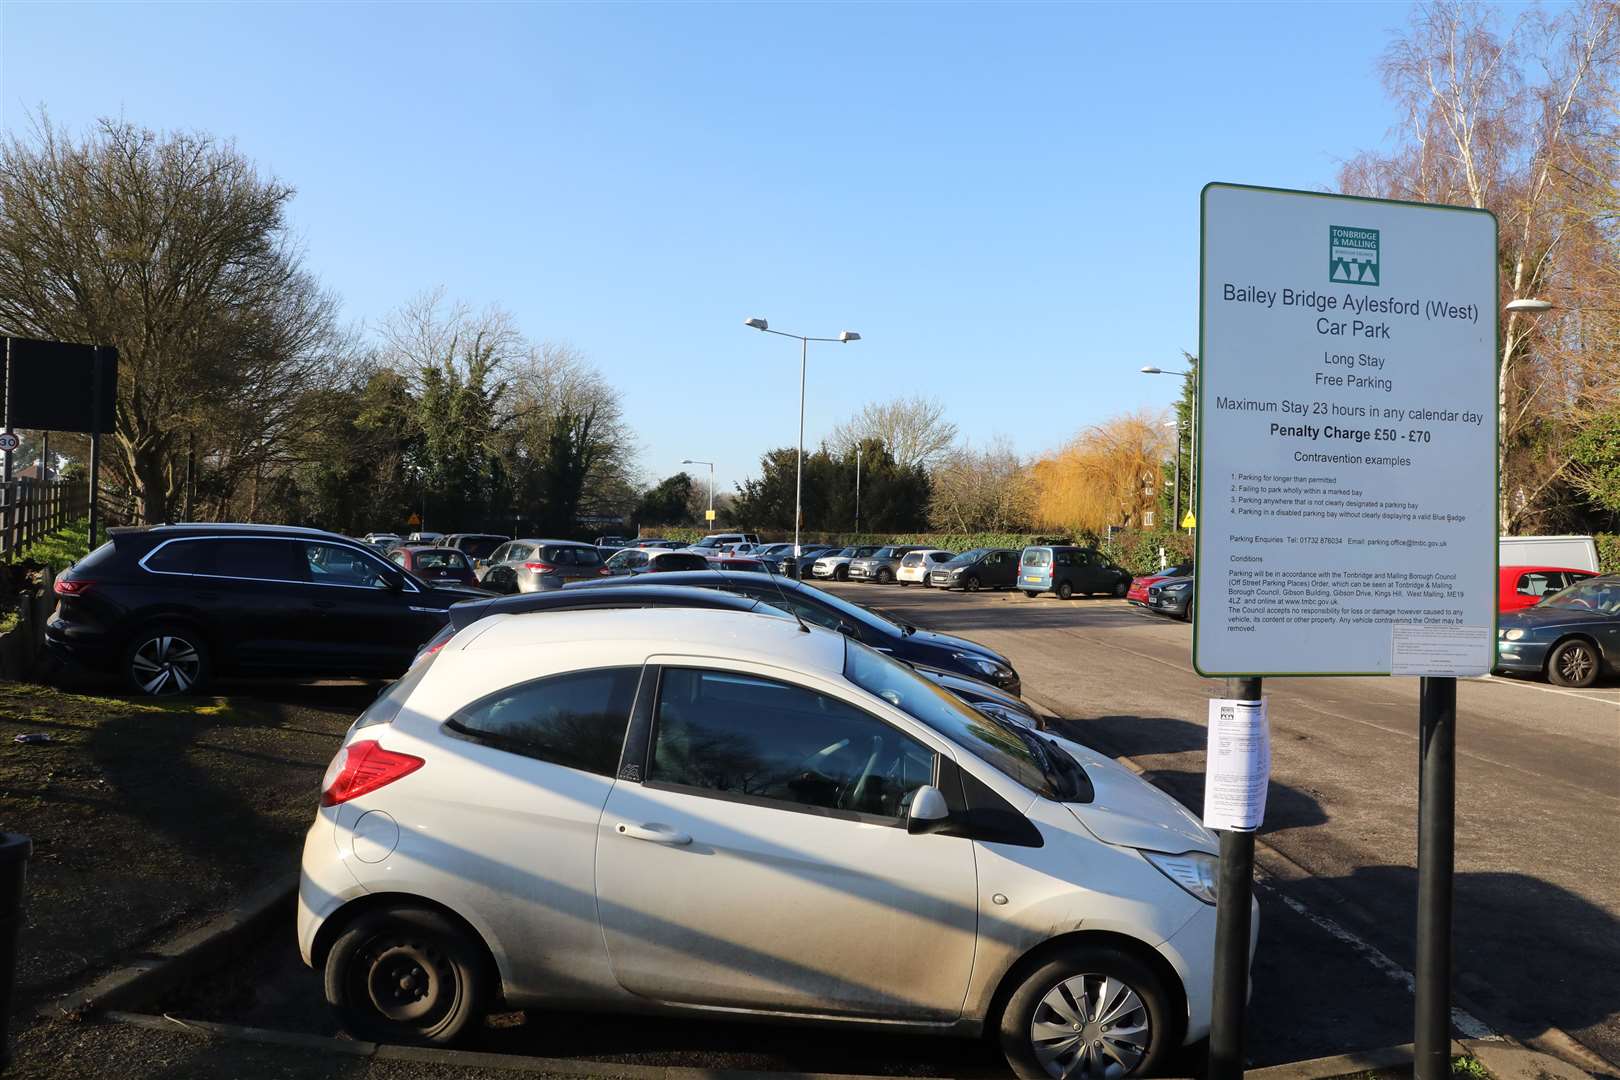 Residents, teachers, businesses and visitors all need to use Bailey Bridge Car Park in Aylesford. Picture: Andy Jones